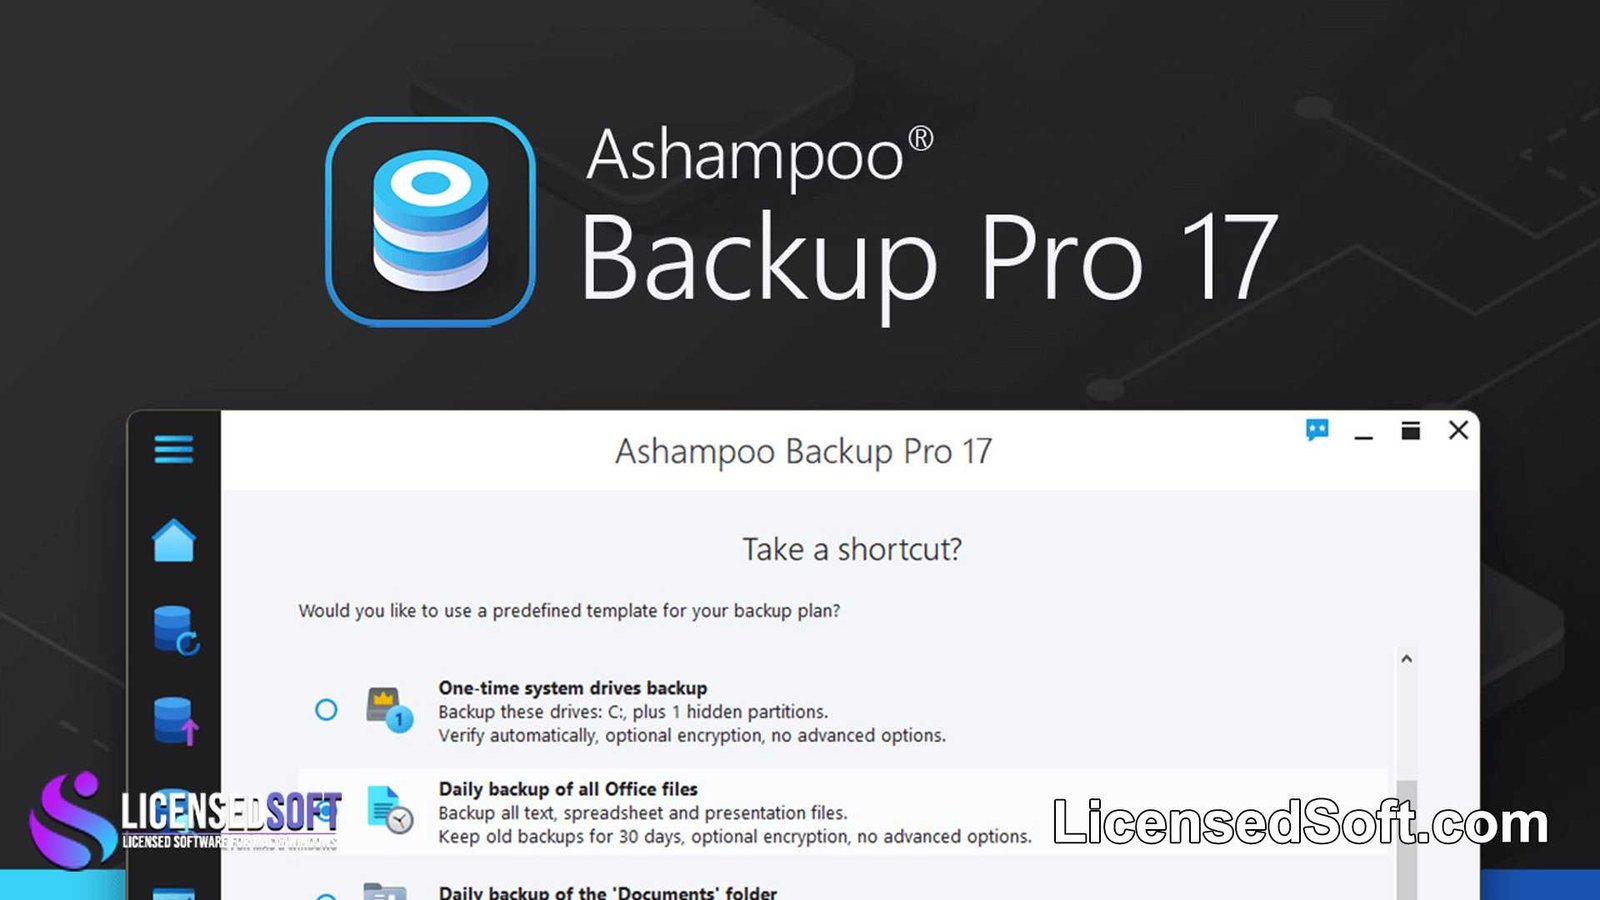 Ashampoo Backup Pro 17.11 Perpetual License By LicensedSoft